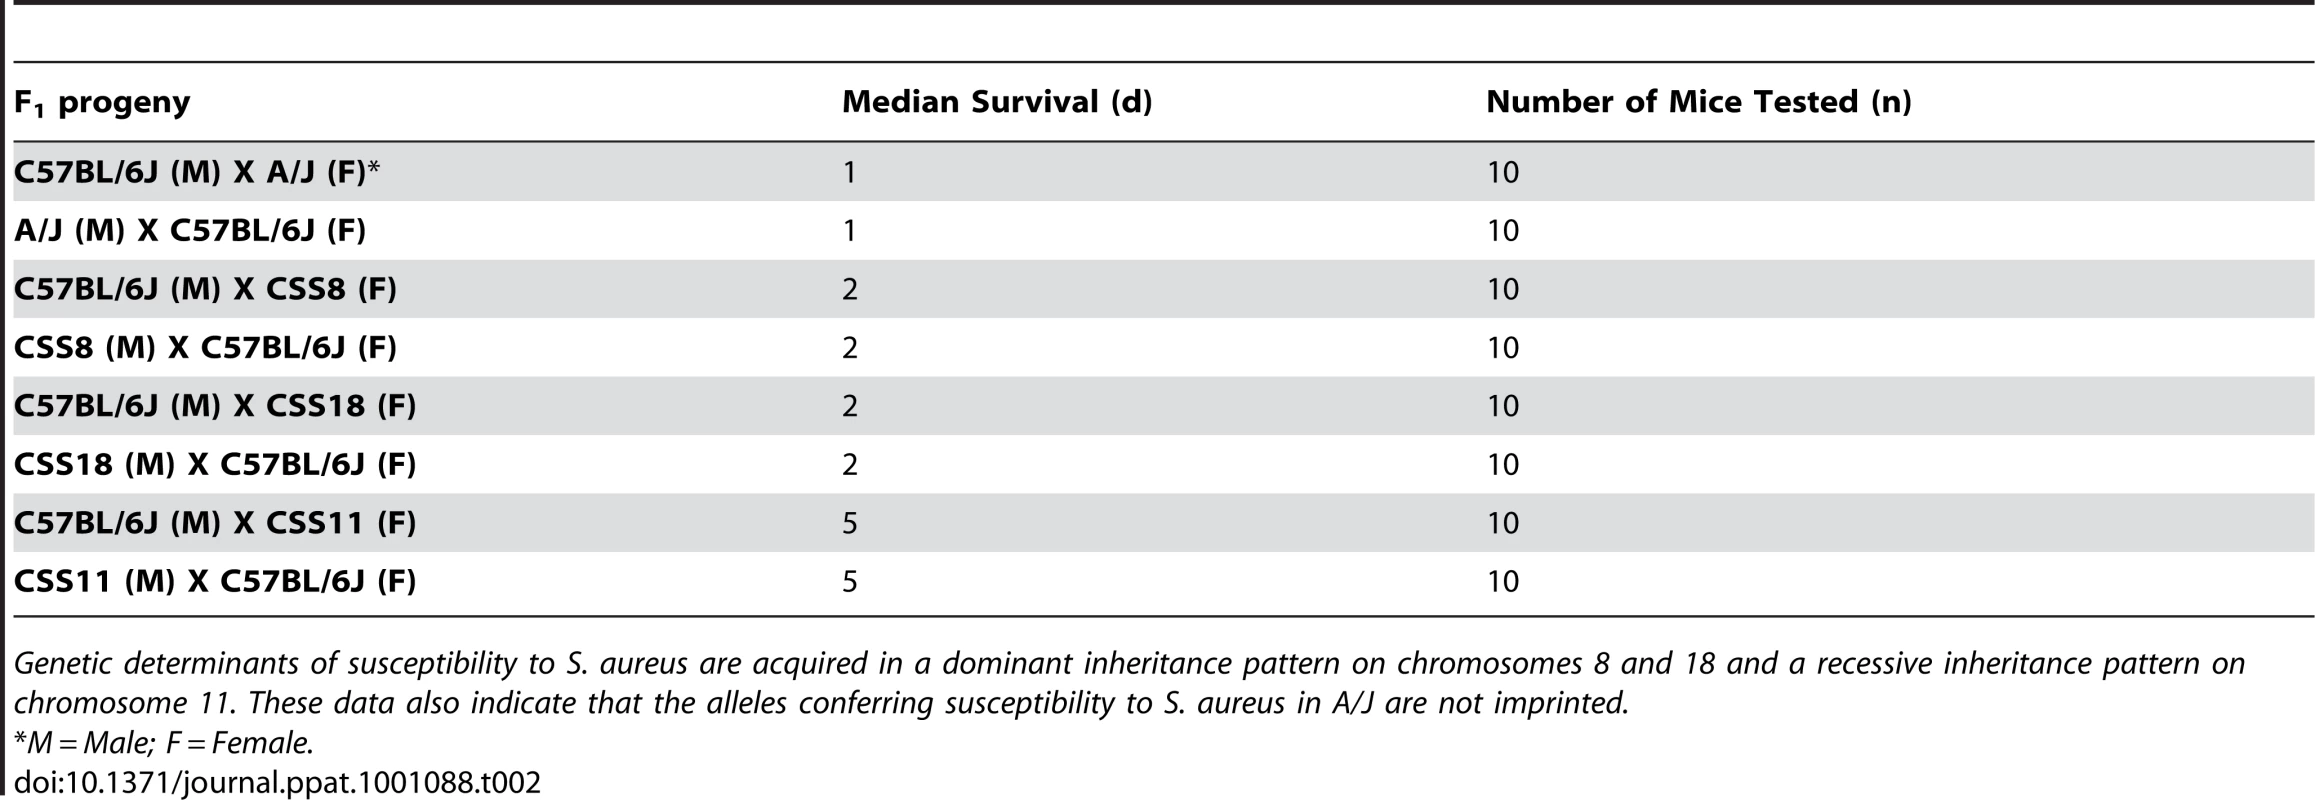 Median survivals of F<sub>1</sub> progeny of Chromosomal Substitution Strains 8, 11, and 18.